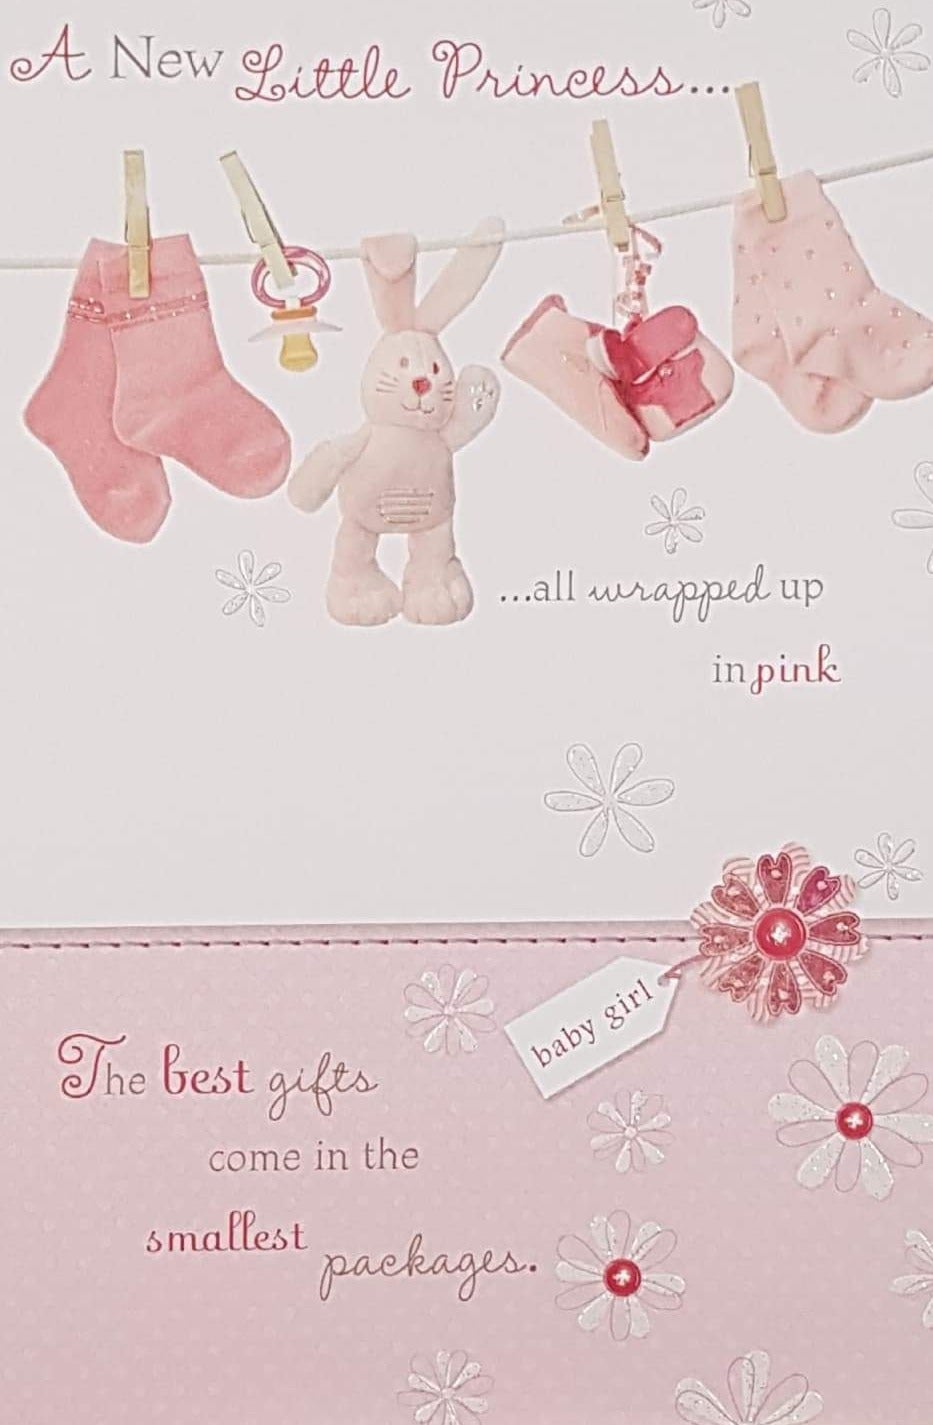 New Baby Card - Girl / A Pink Rabbit And Socks Hanging To Let Them Dry